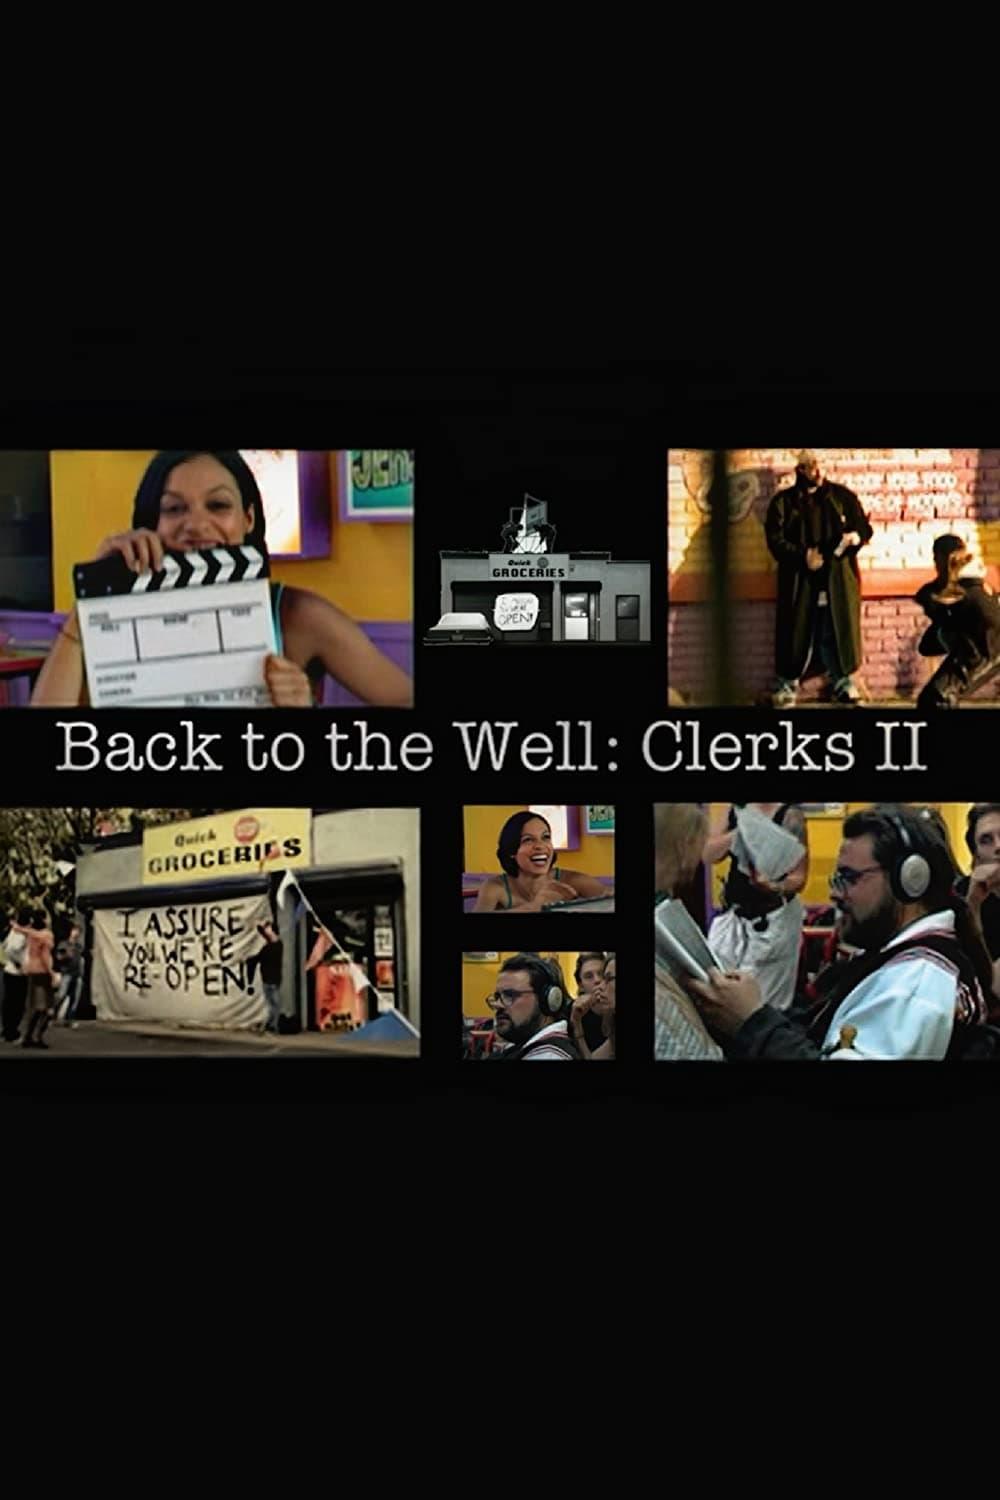 Back to the Well: 'Clerks II' poster